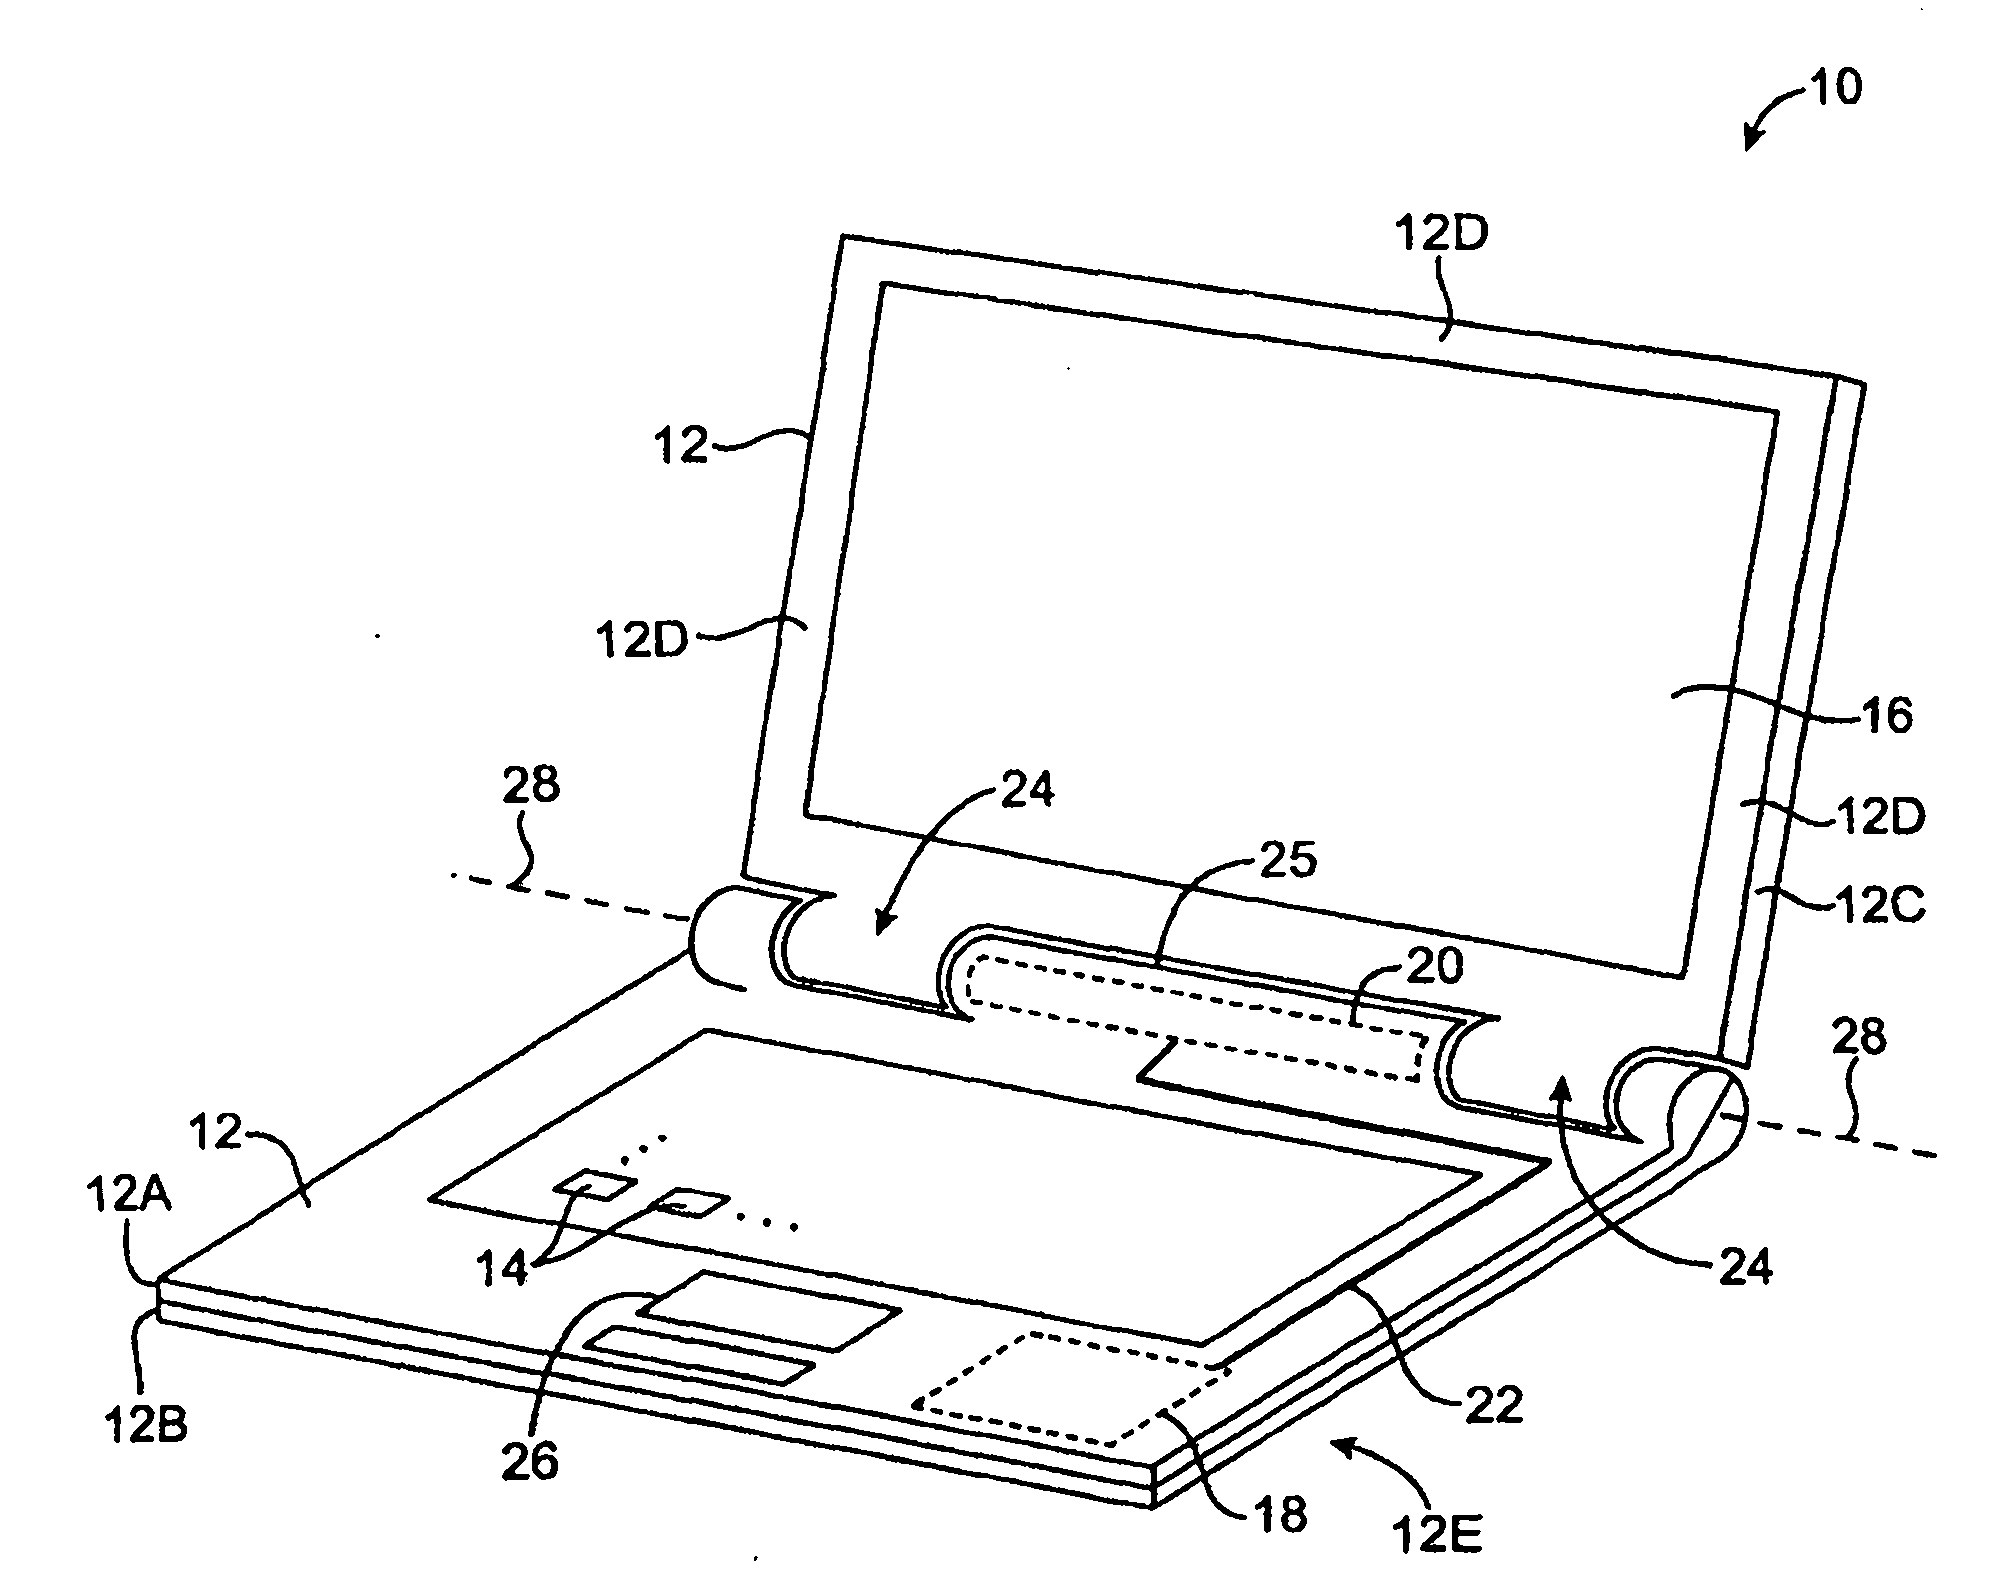 Antennas and antenna carrier structures for electronic devices